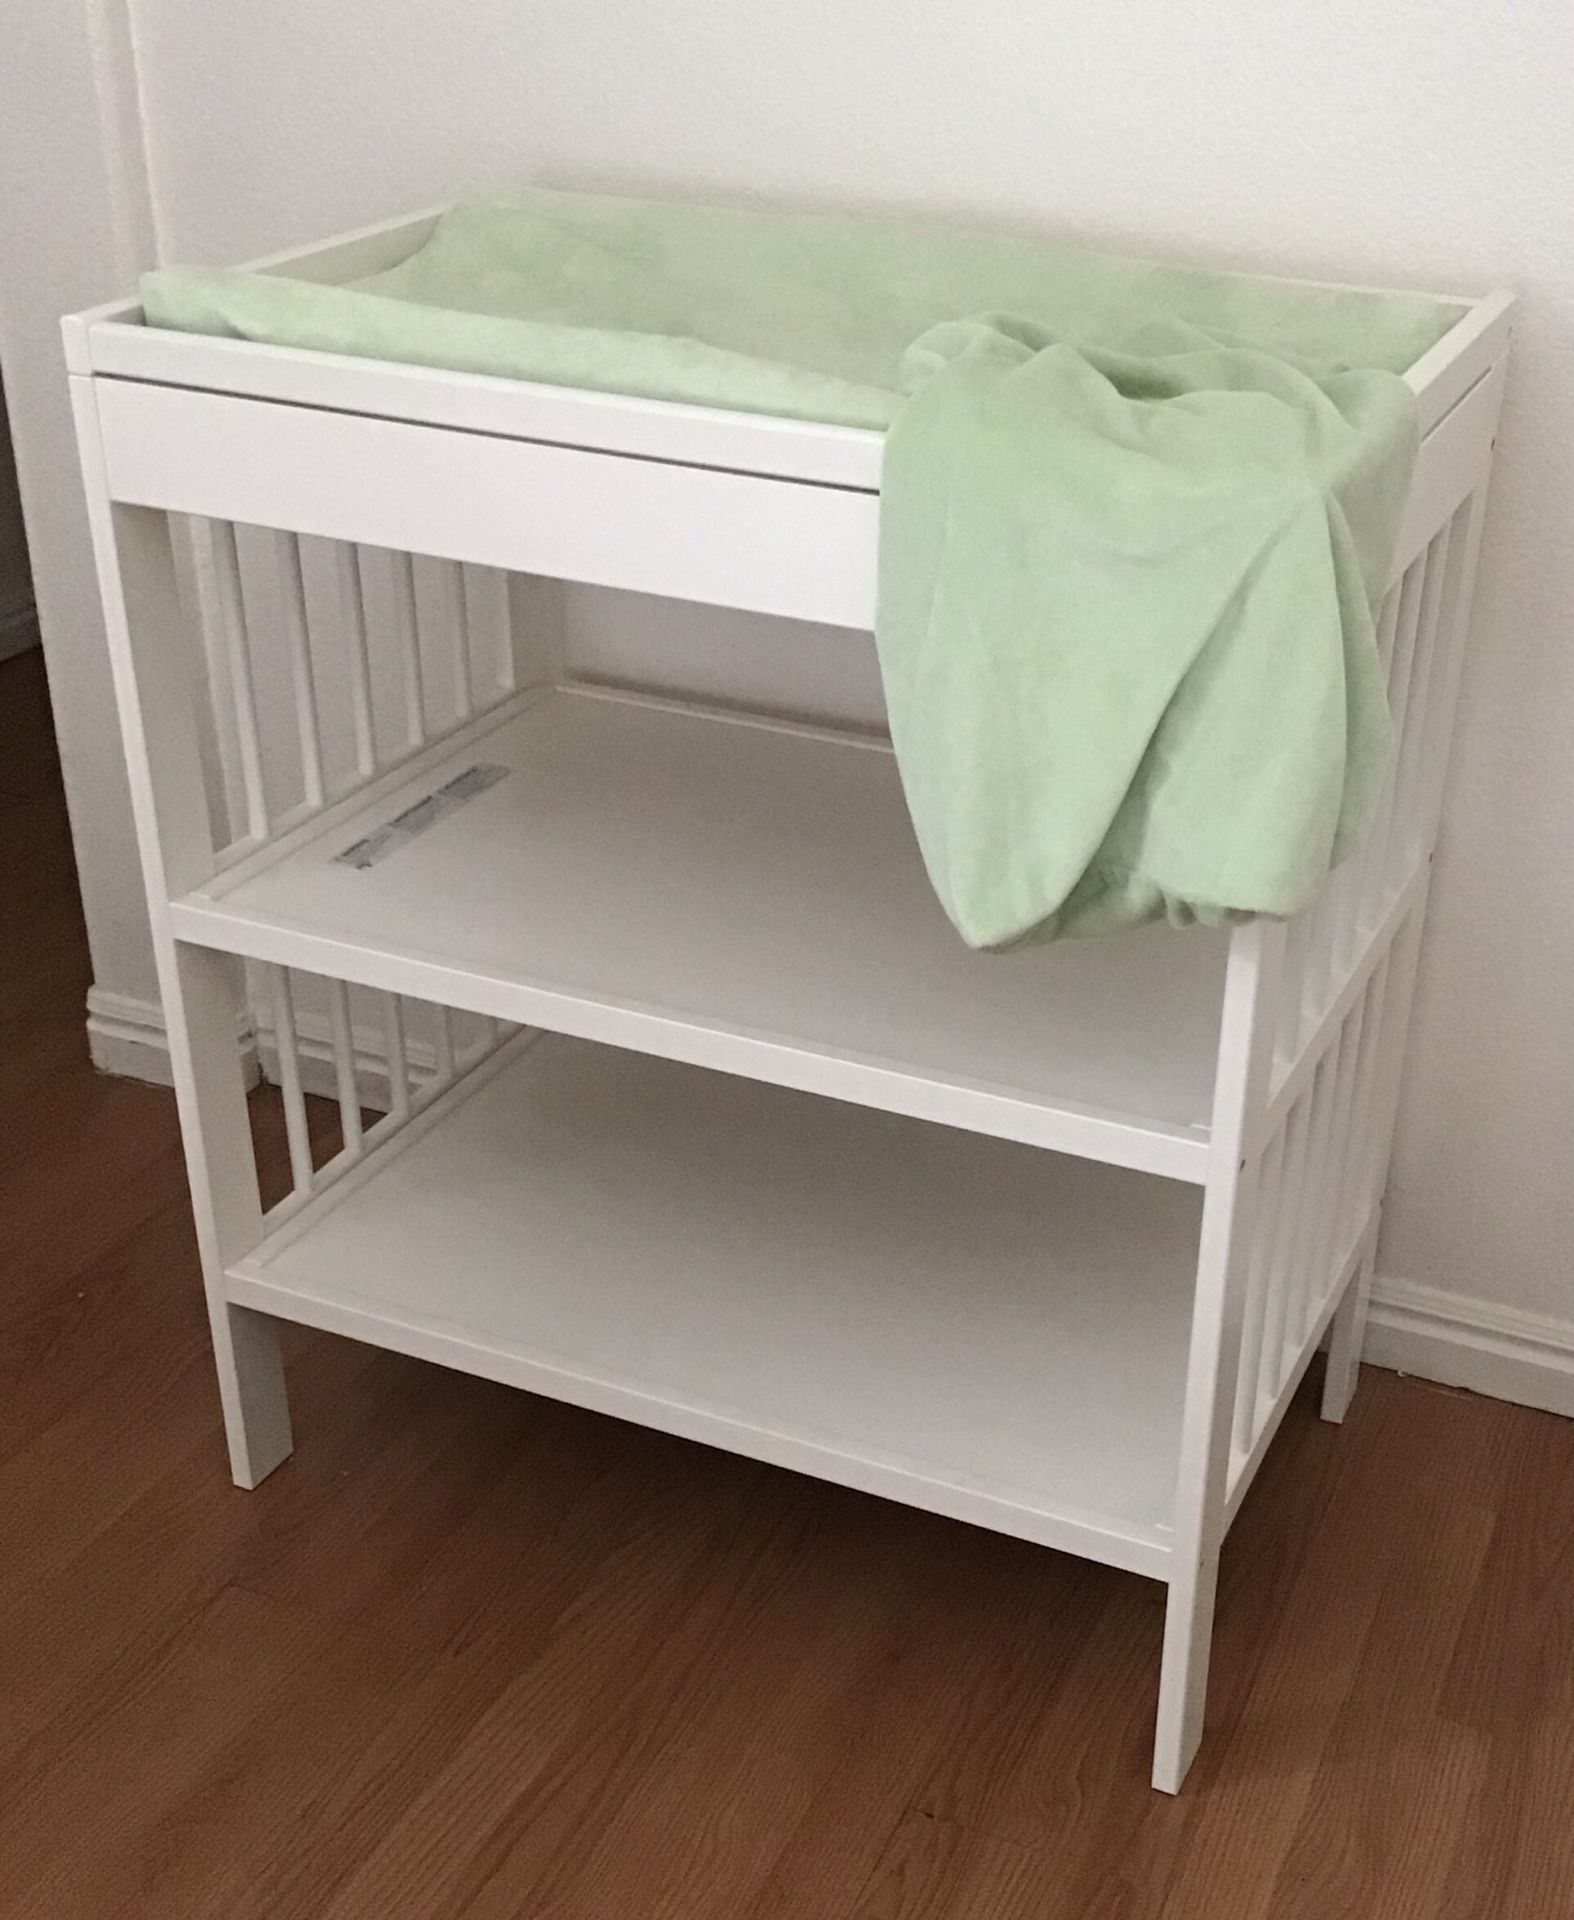 Changing table with pad and covers